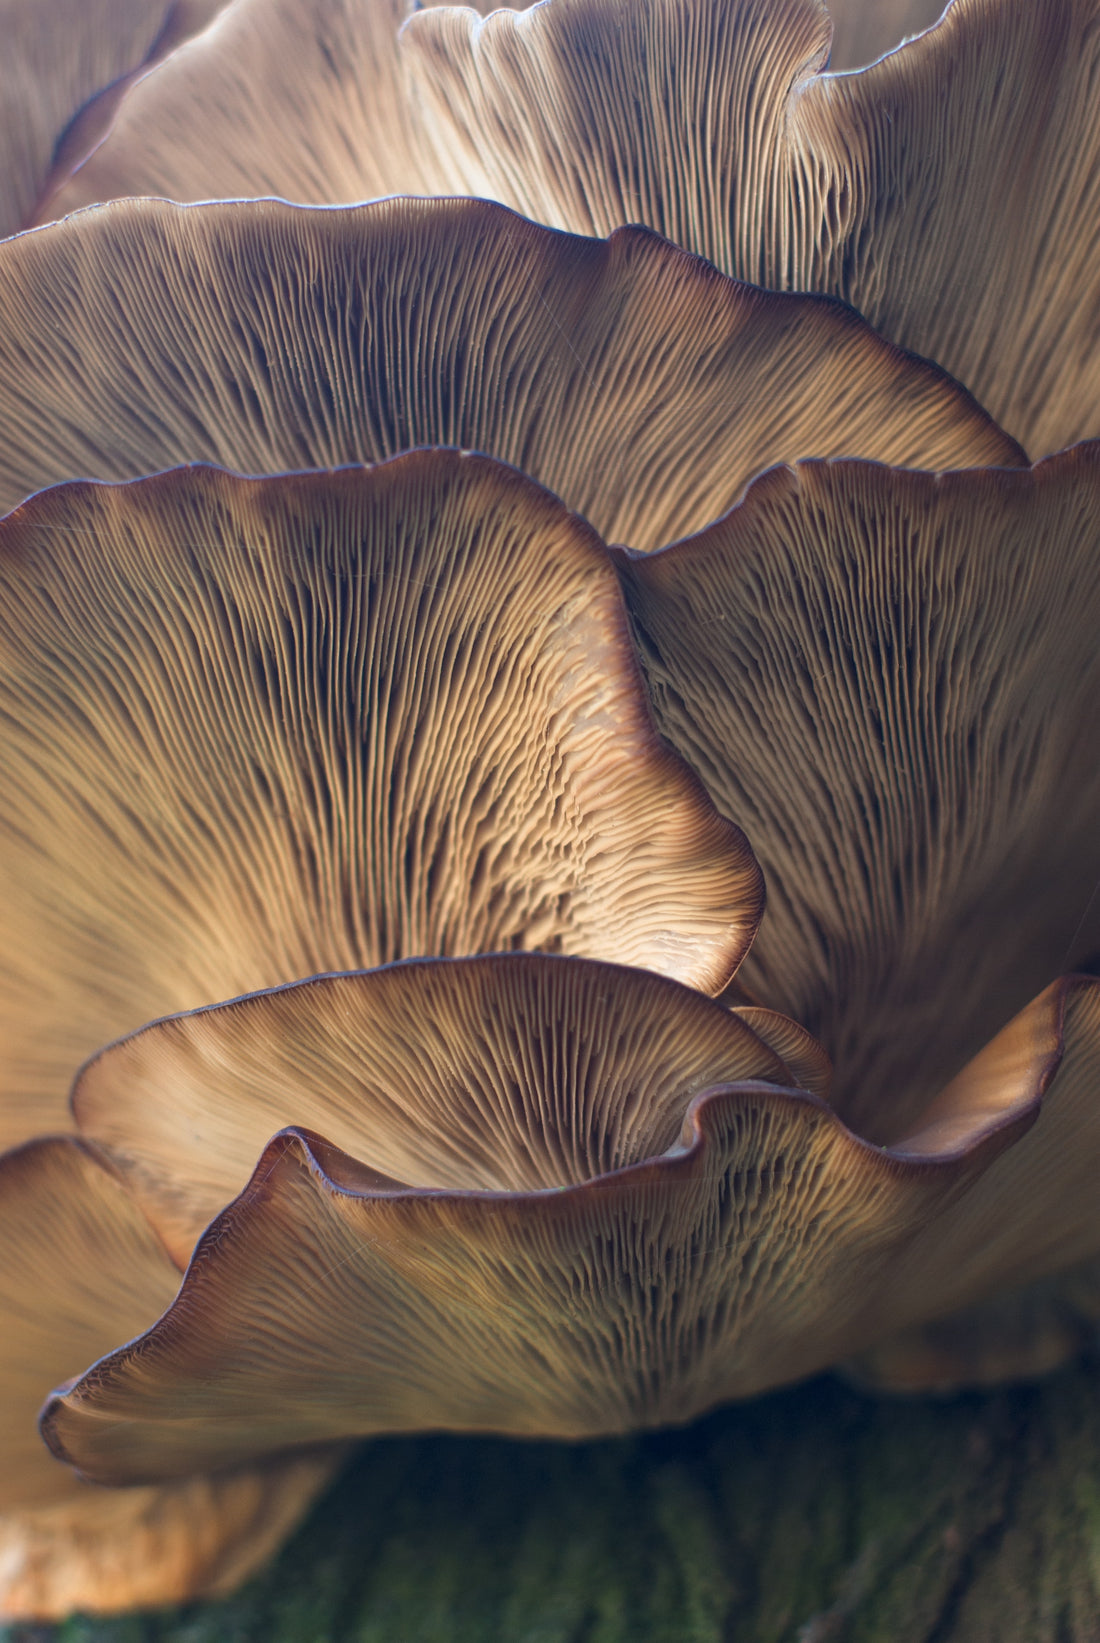 Reishi Mushroom: Facts About These Medicinal Mushrooms